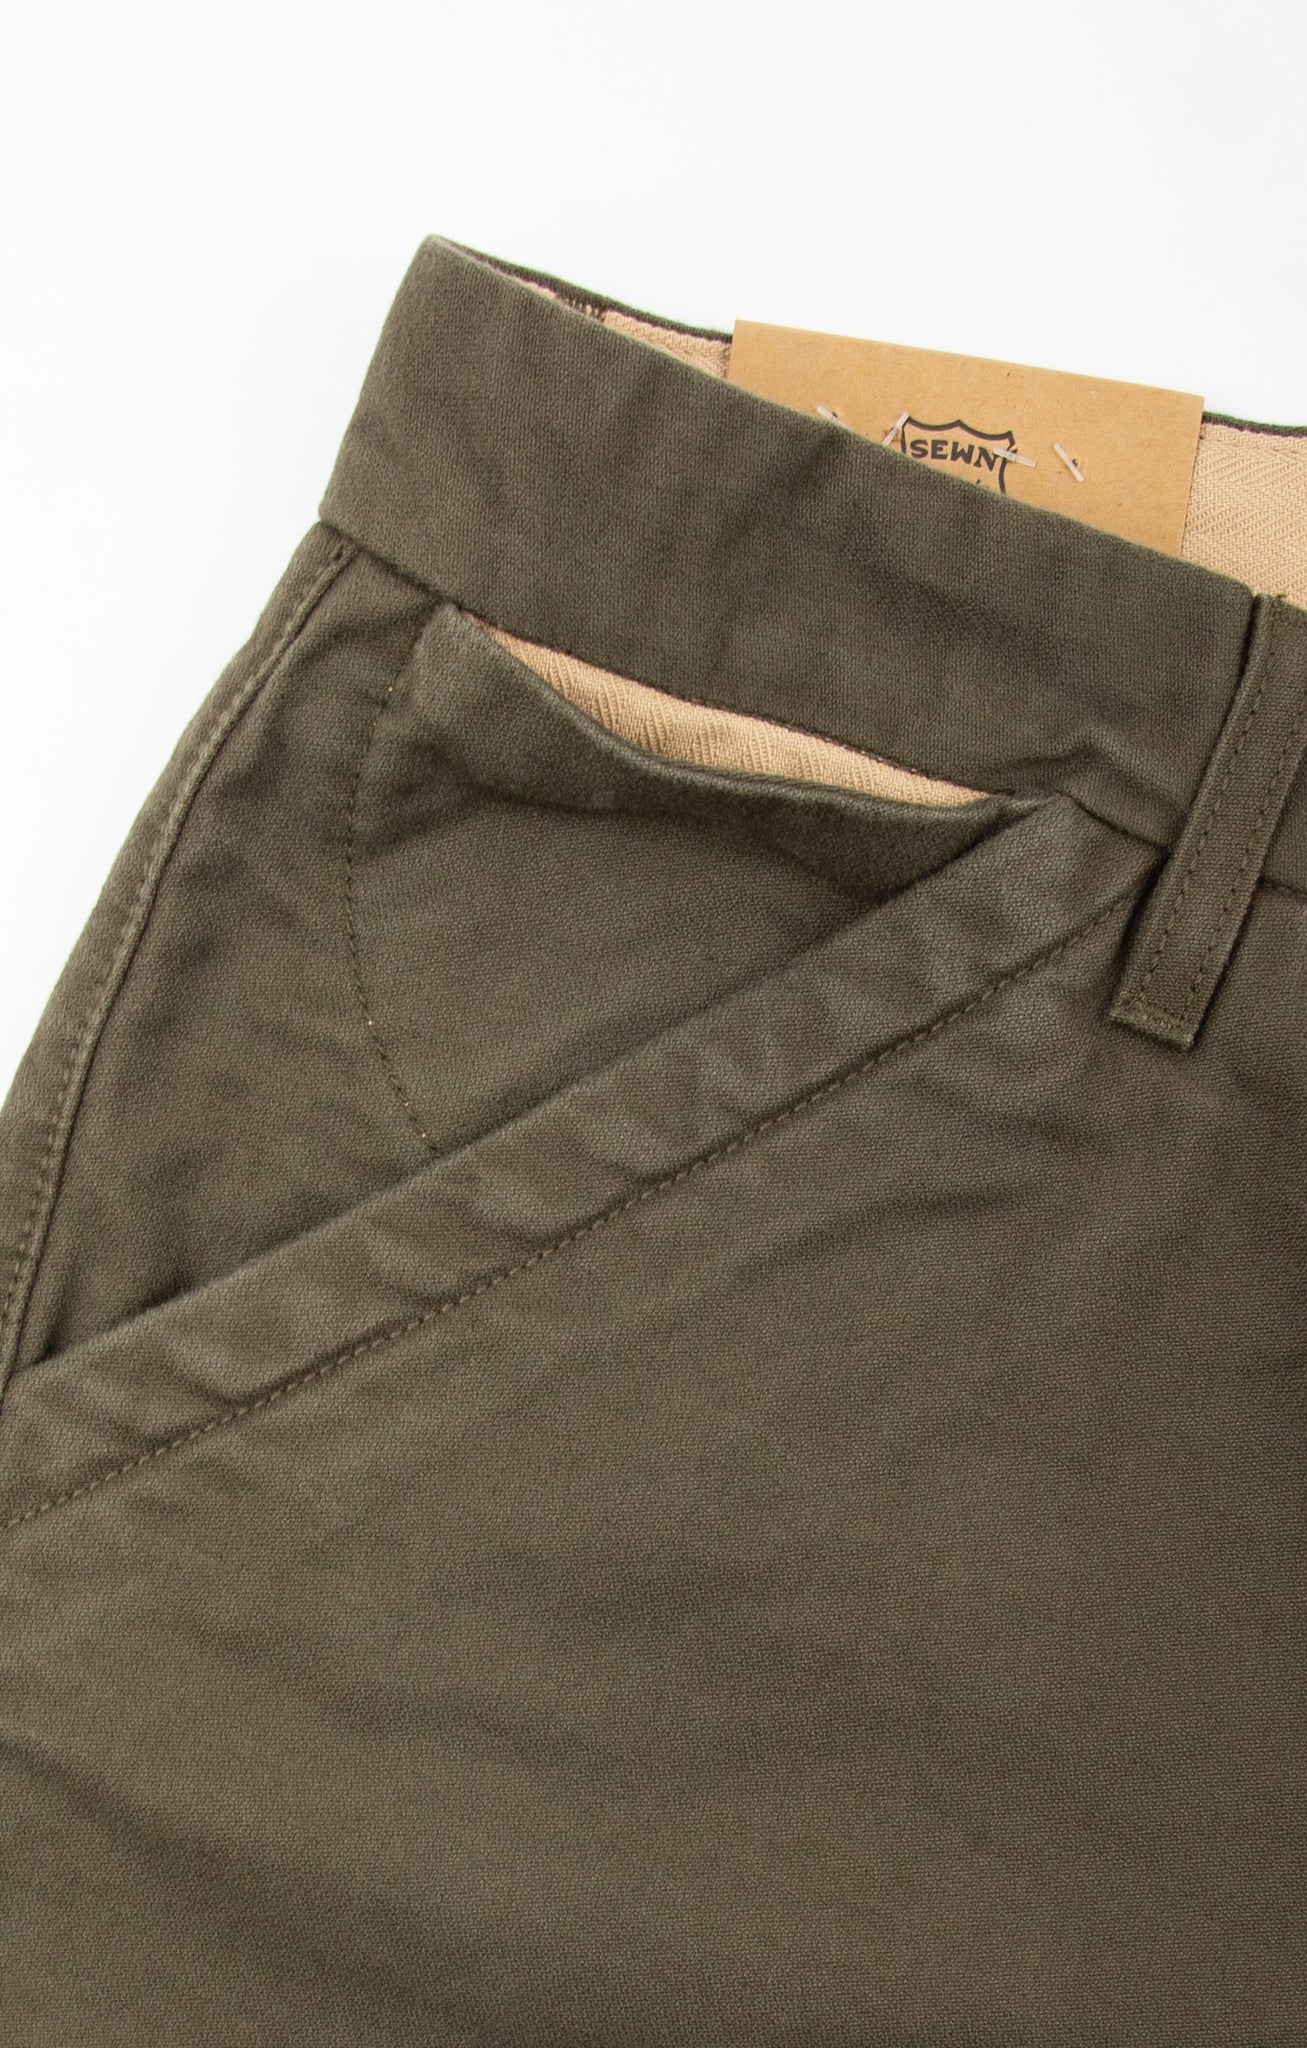 Freenote Cloth Workers Chino Slim Fit - Olive